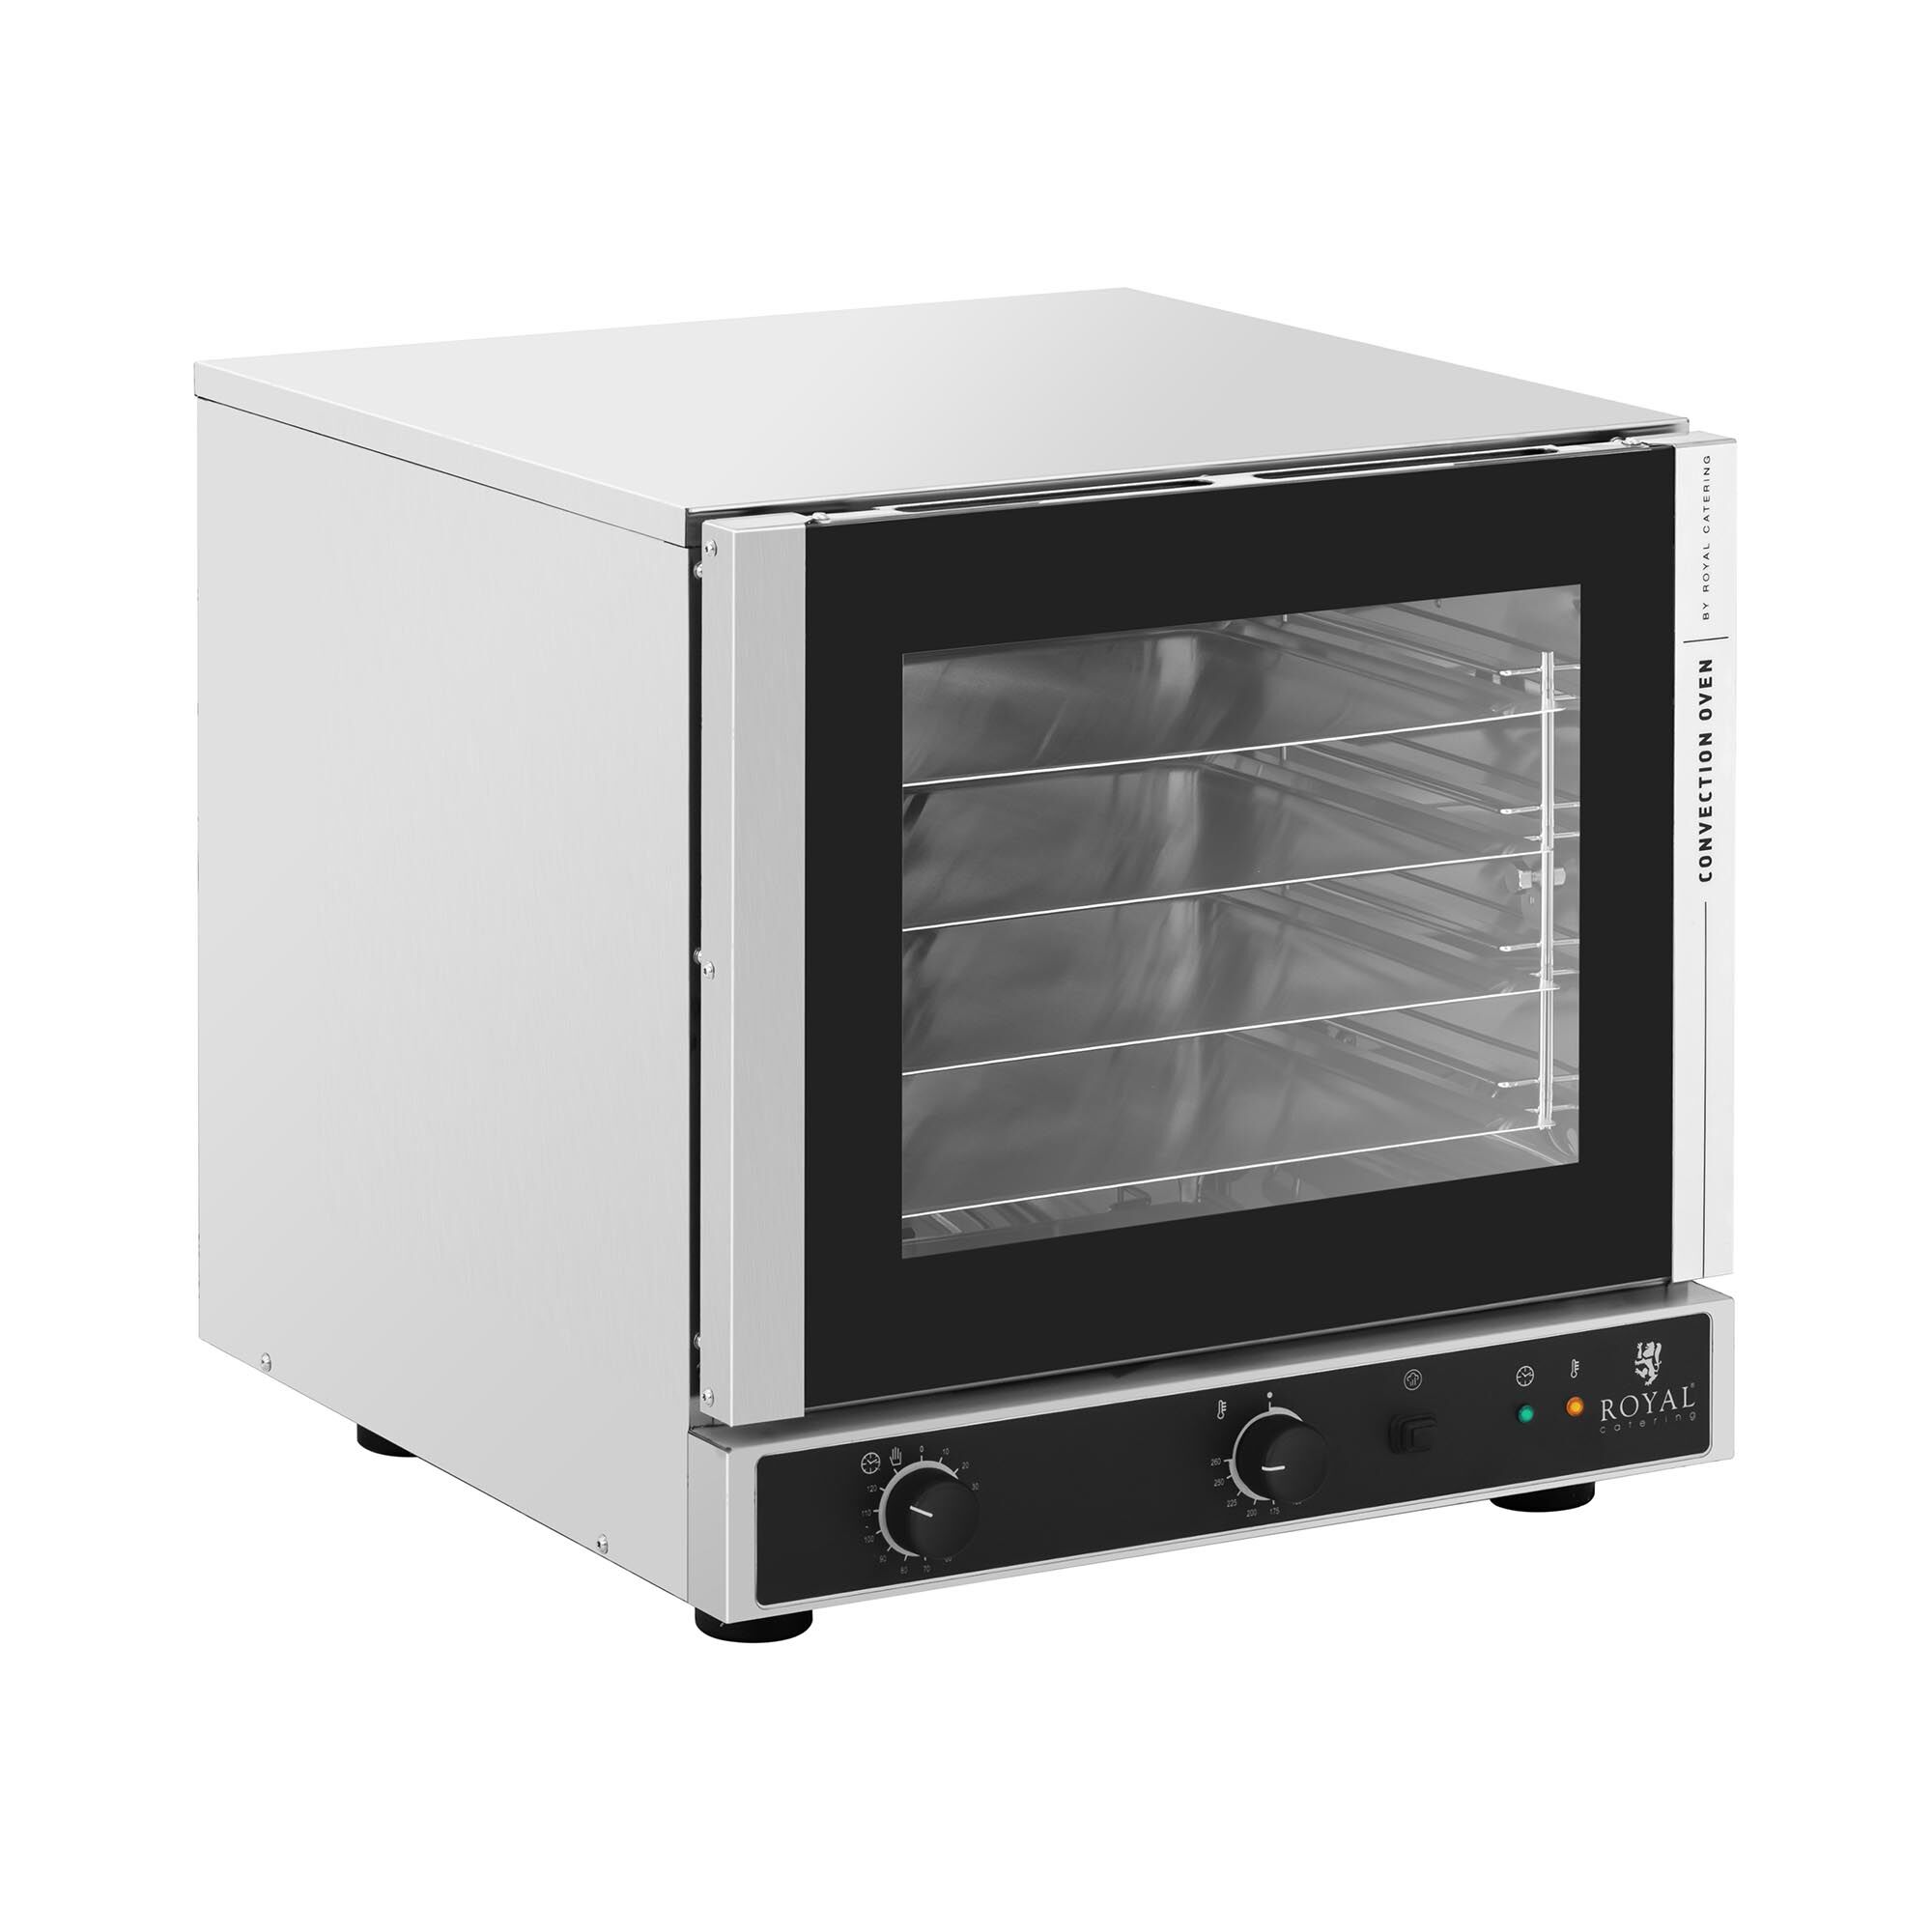 Royal Catering Convection Oven - 2,800 W - steam function - incl. 4 baking sheets (429 x 345 mm) RC-429M